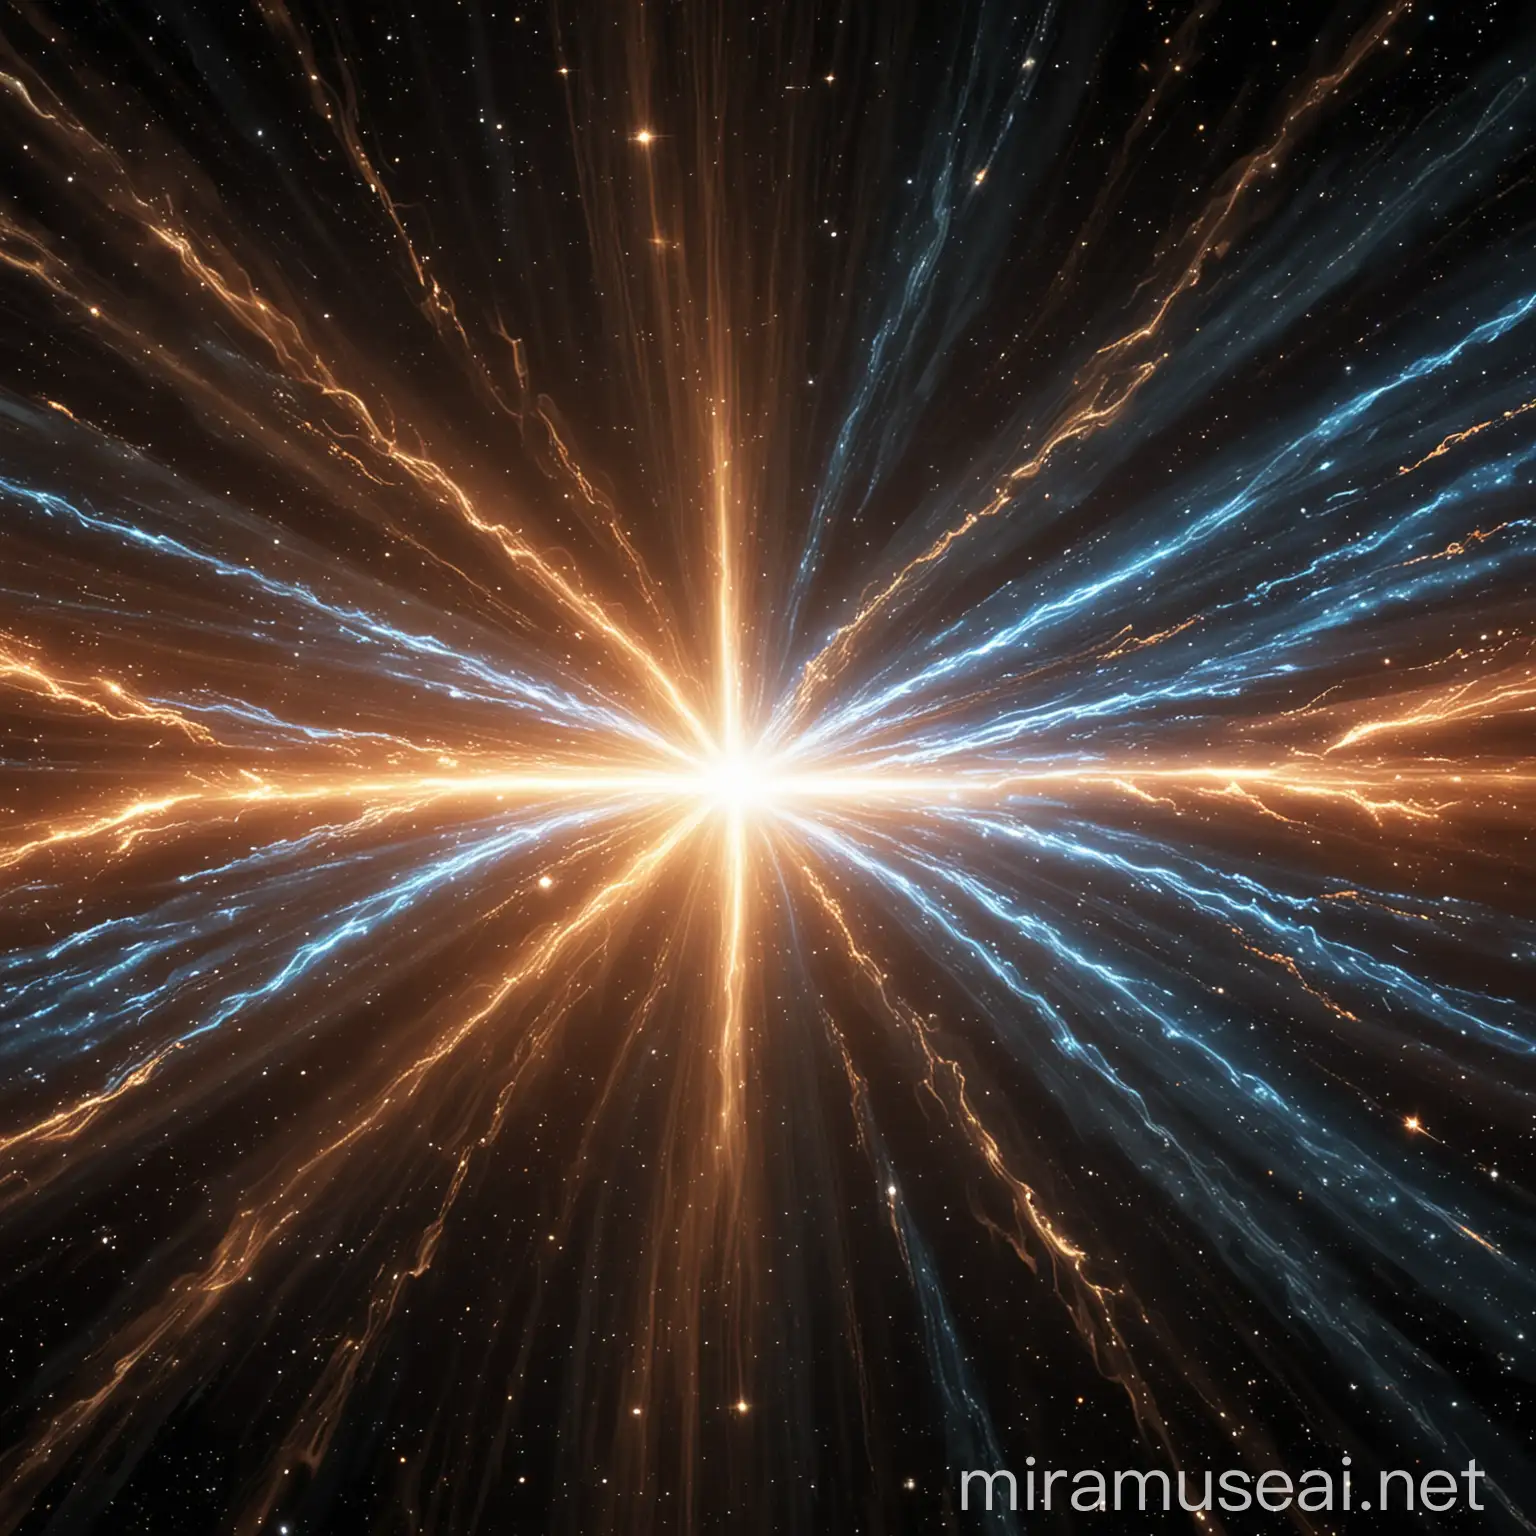 A pulsar emitting beams of light in all directions, with the brand name "Cosmic Connect" pulsating in sync